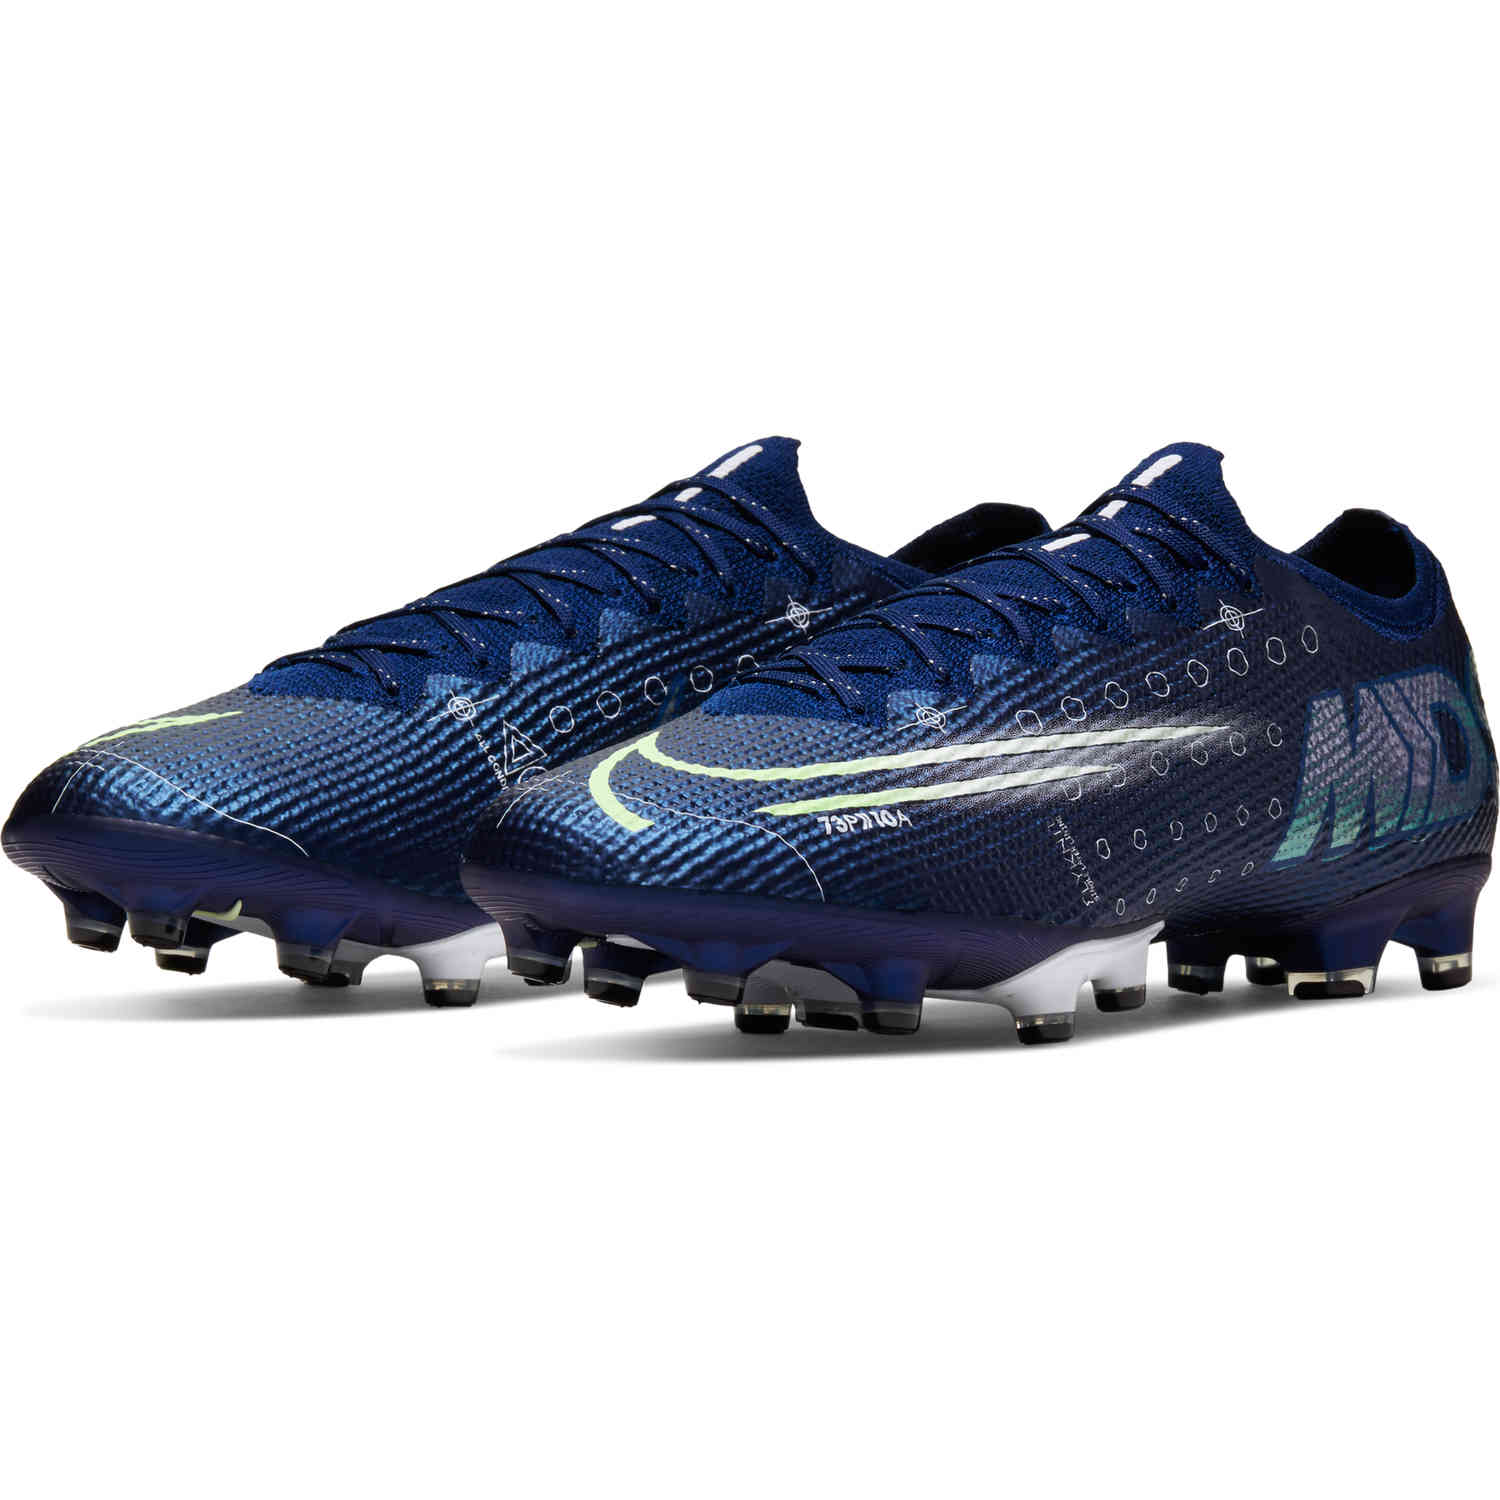 Nike Dream Speed Mercurial Superfly VII Club TF Mens Boots